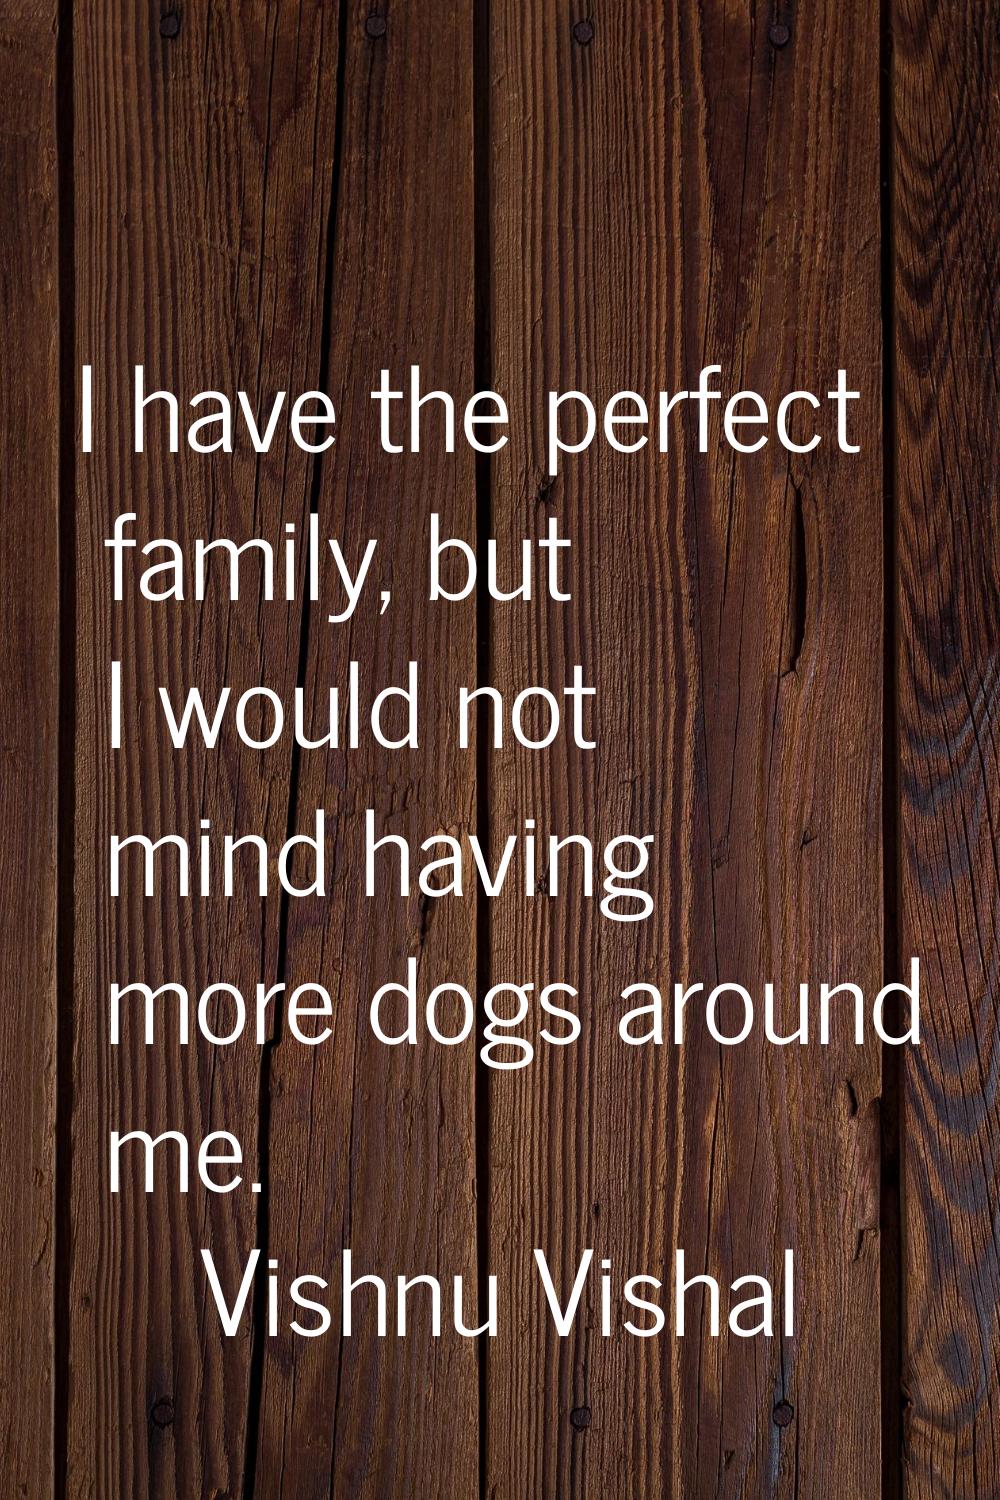 I have the perfect family, but I would not mind having more dogs around me.